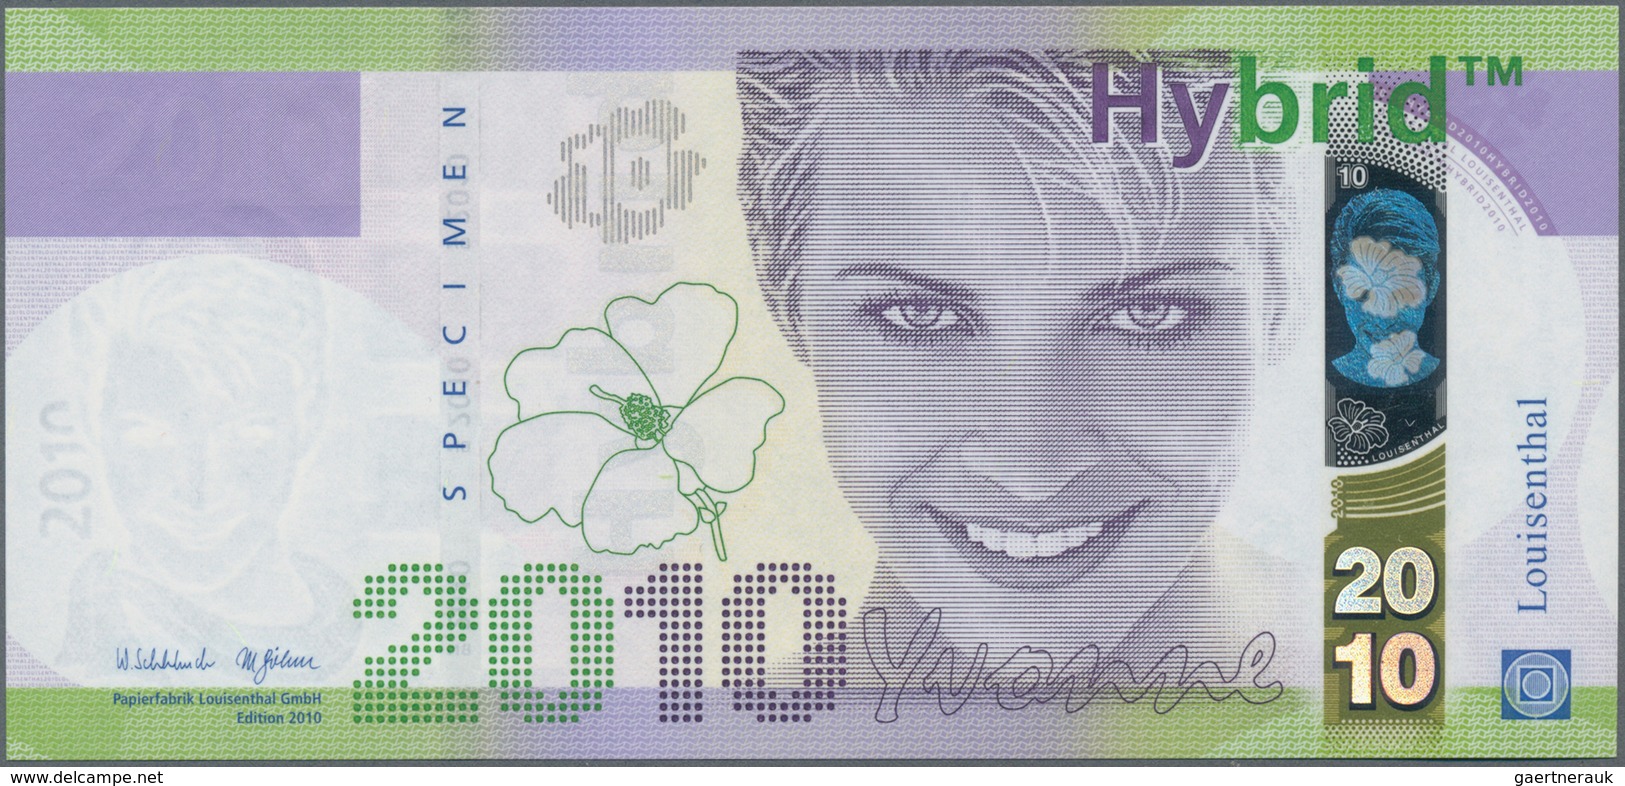 Testbanknoten: Germany: Hybrid Substrate Test Banknote Produced By Louisenthal. This "Yvonne 2010" N - Specimen